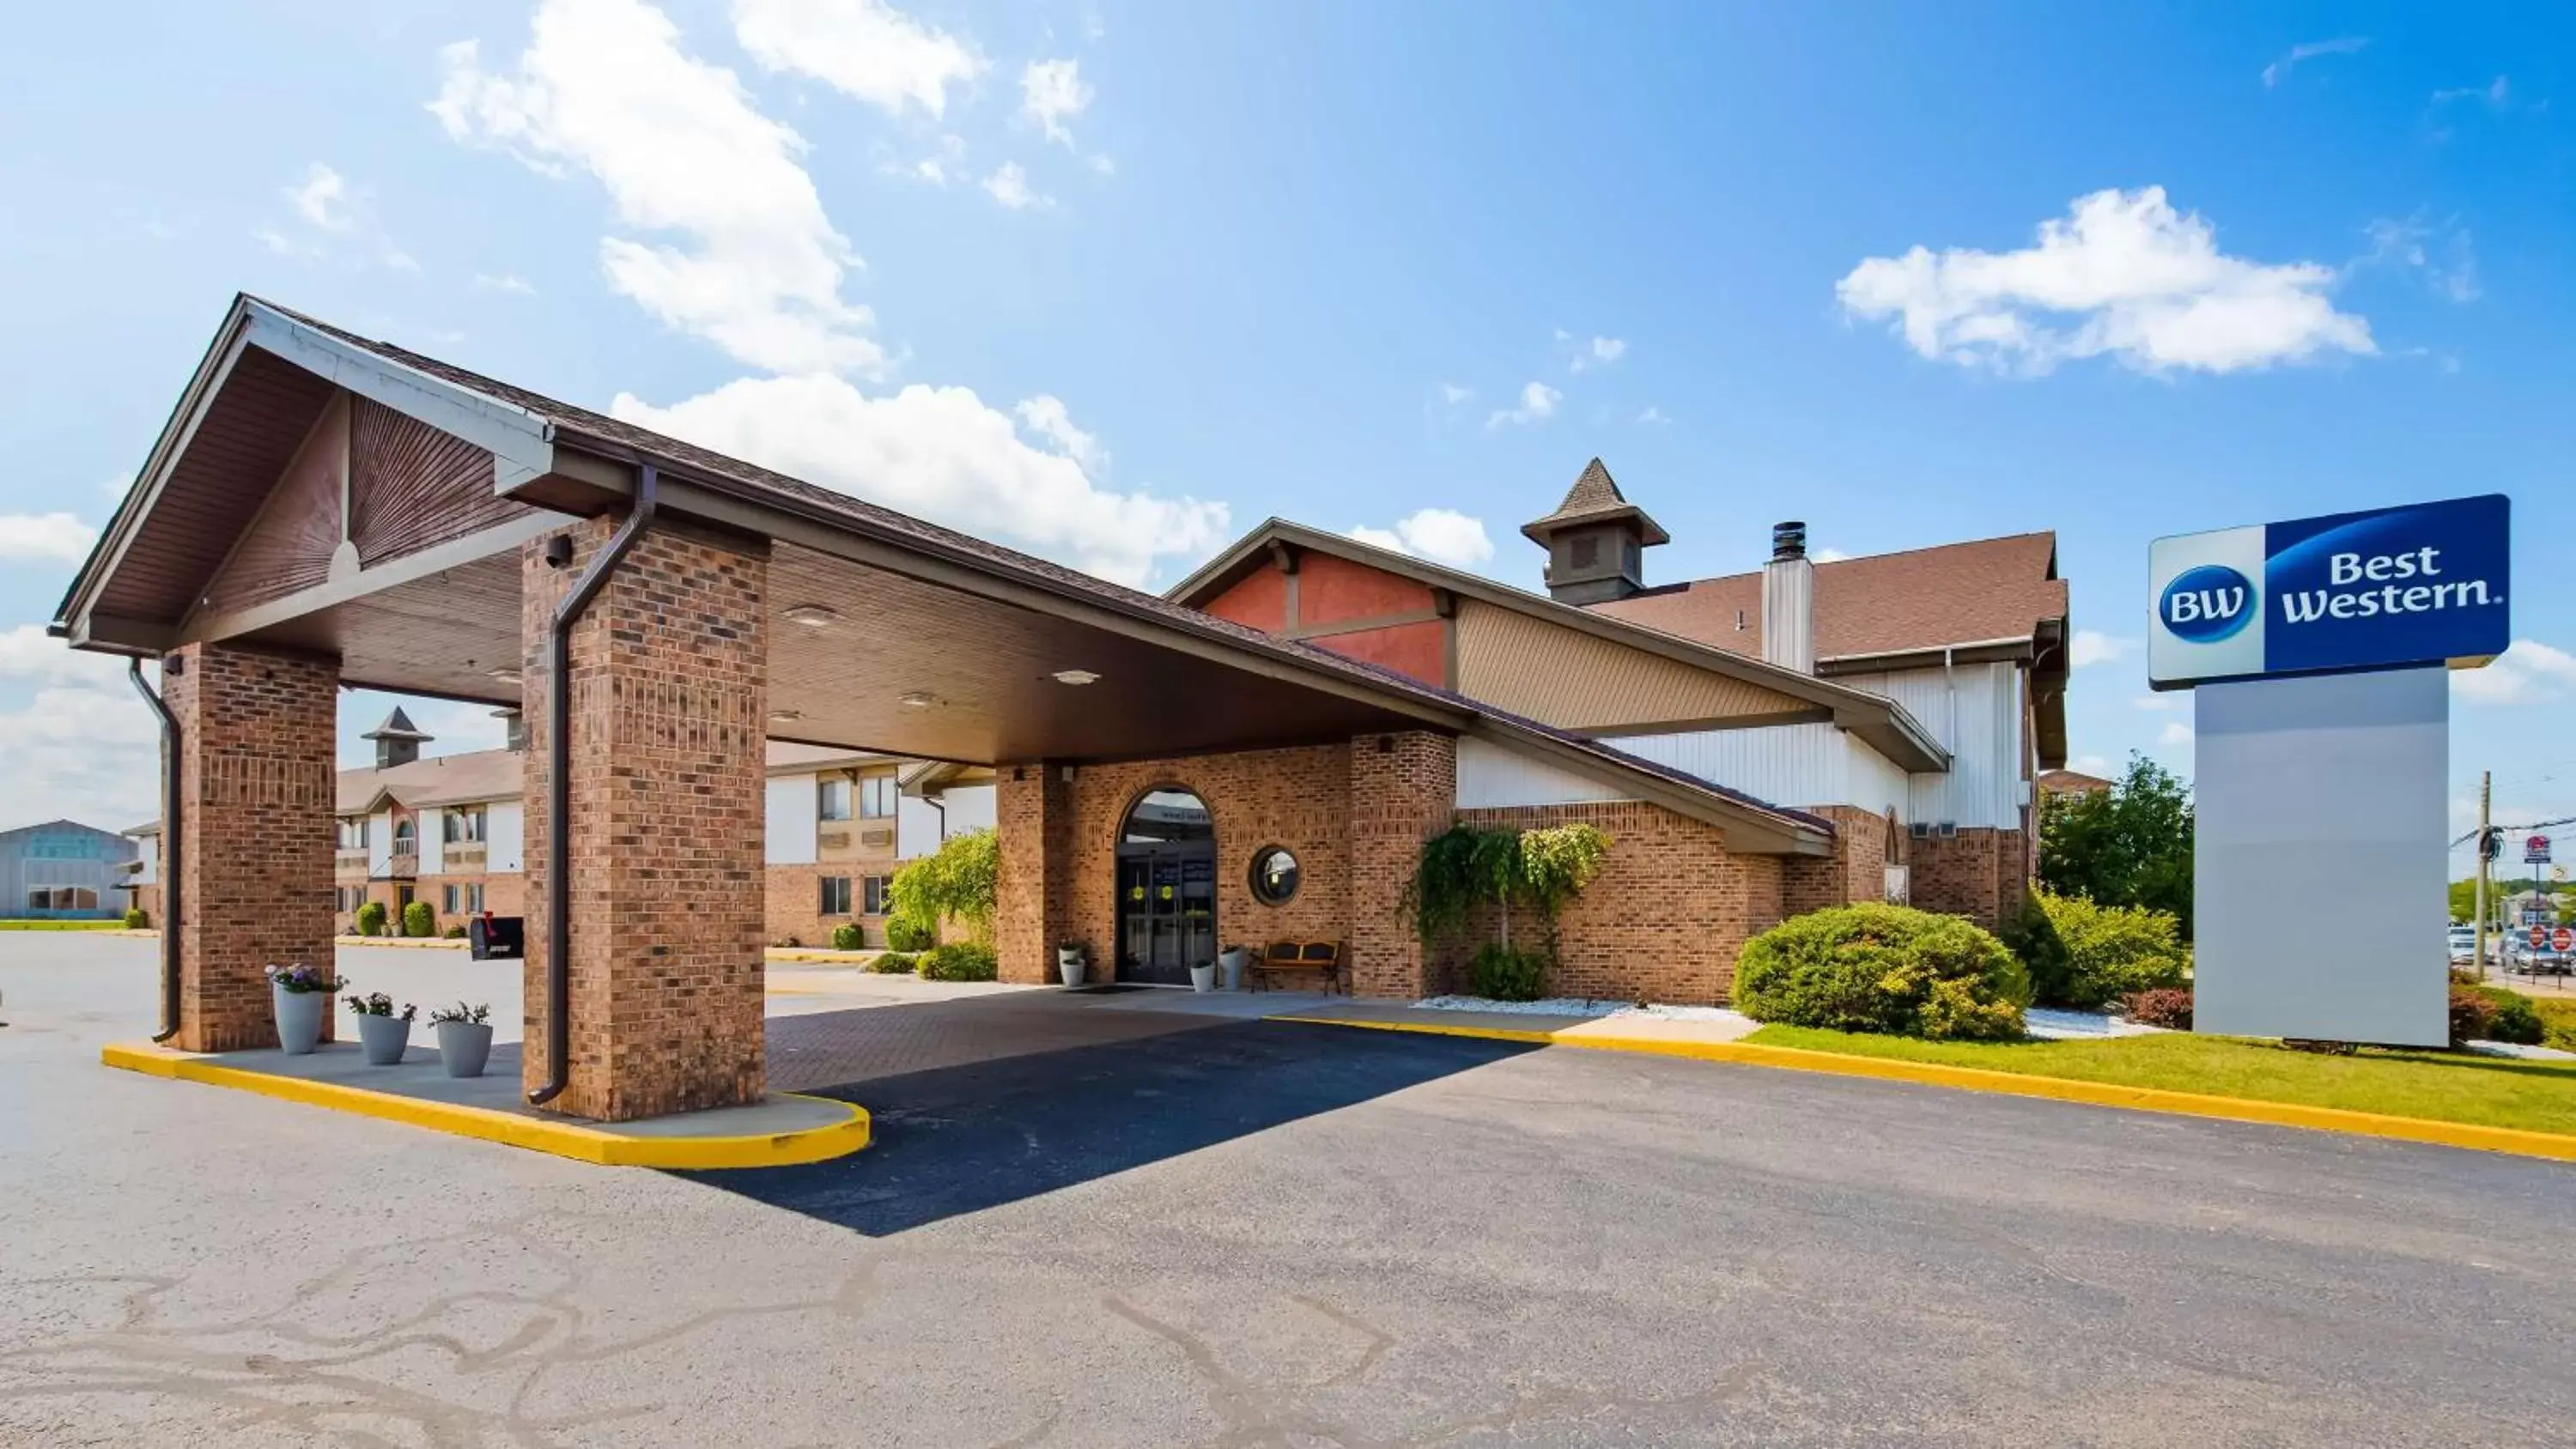 Property Building in Best Western Gaylord